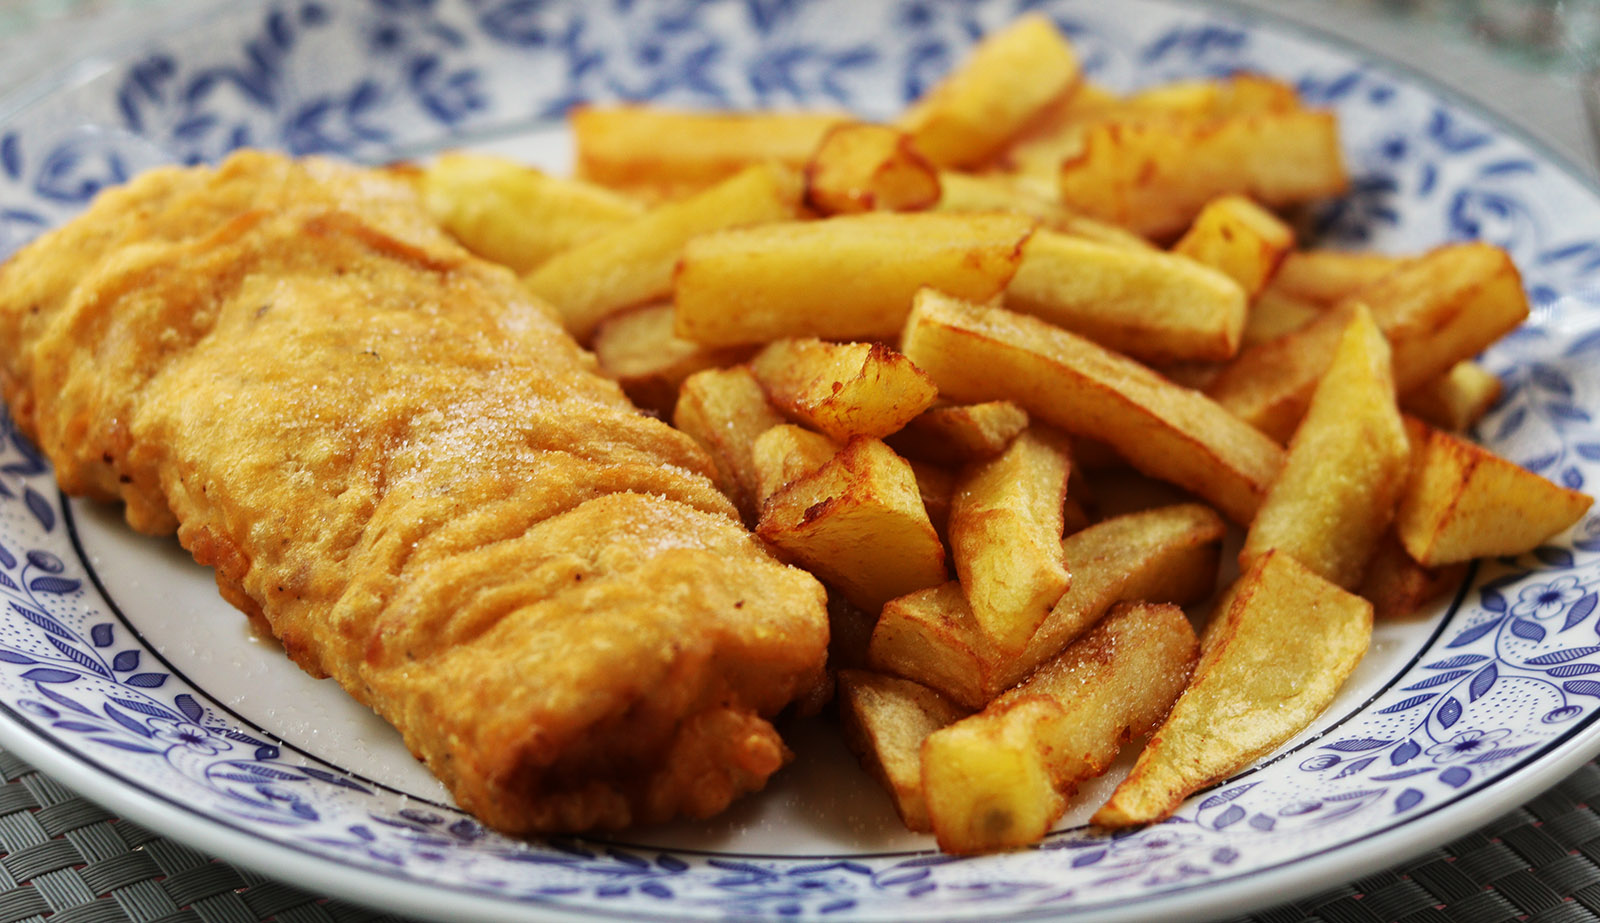 Fish and chips 2 s.jpg